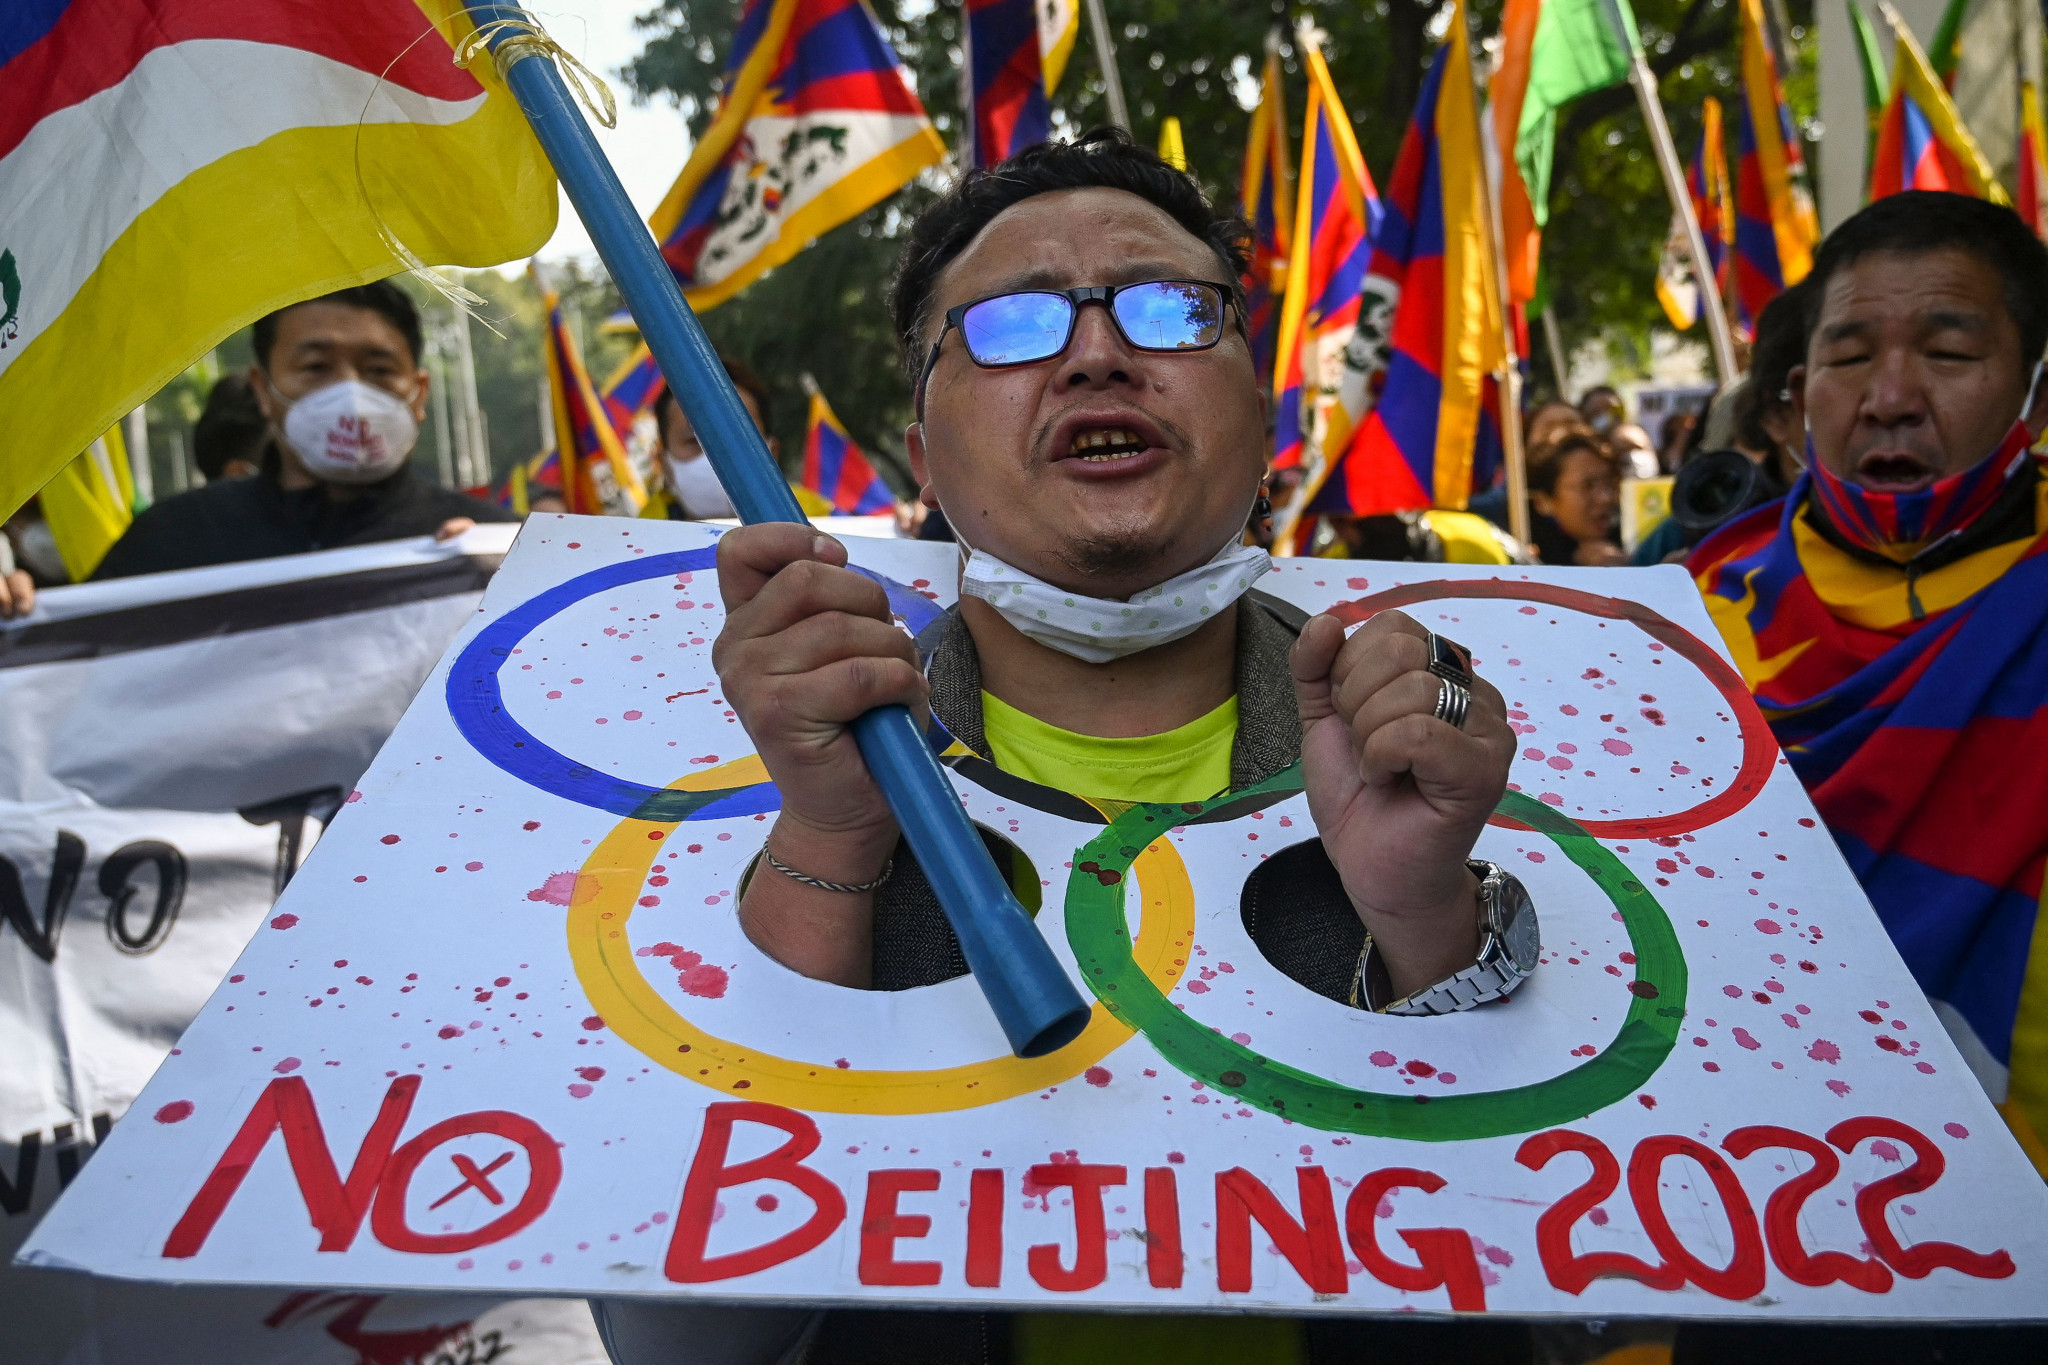 There were widespread protests against the Beijing 2022 Winter Olympics in the build-up to the Games ©Getty Images